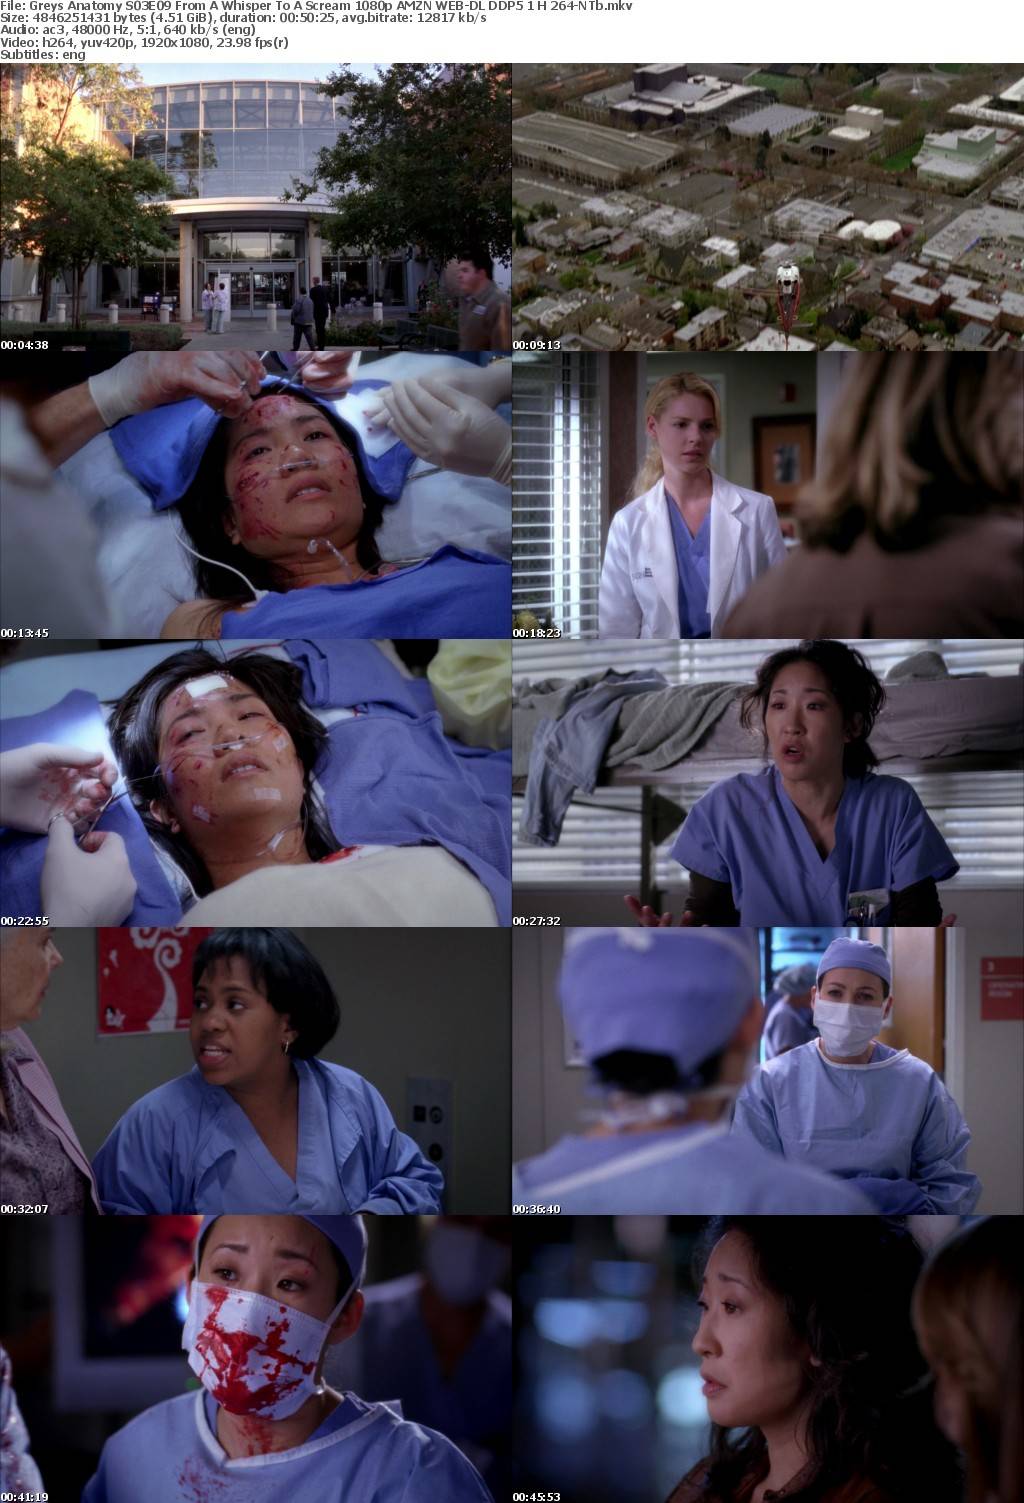 Greys Anatomy S03E09 From A Whisper To A Scream 1080p AMZN WEB-DL DDP5 1 H 264-NTb